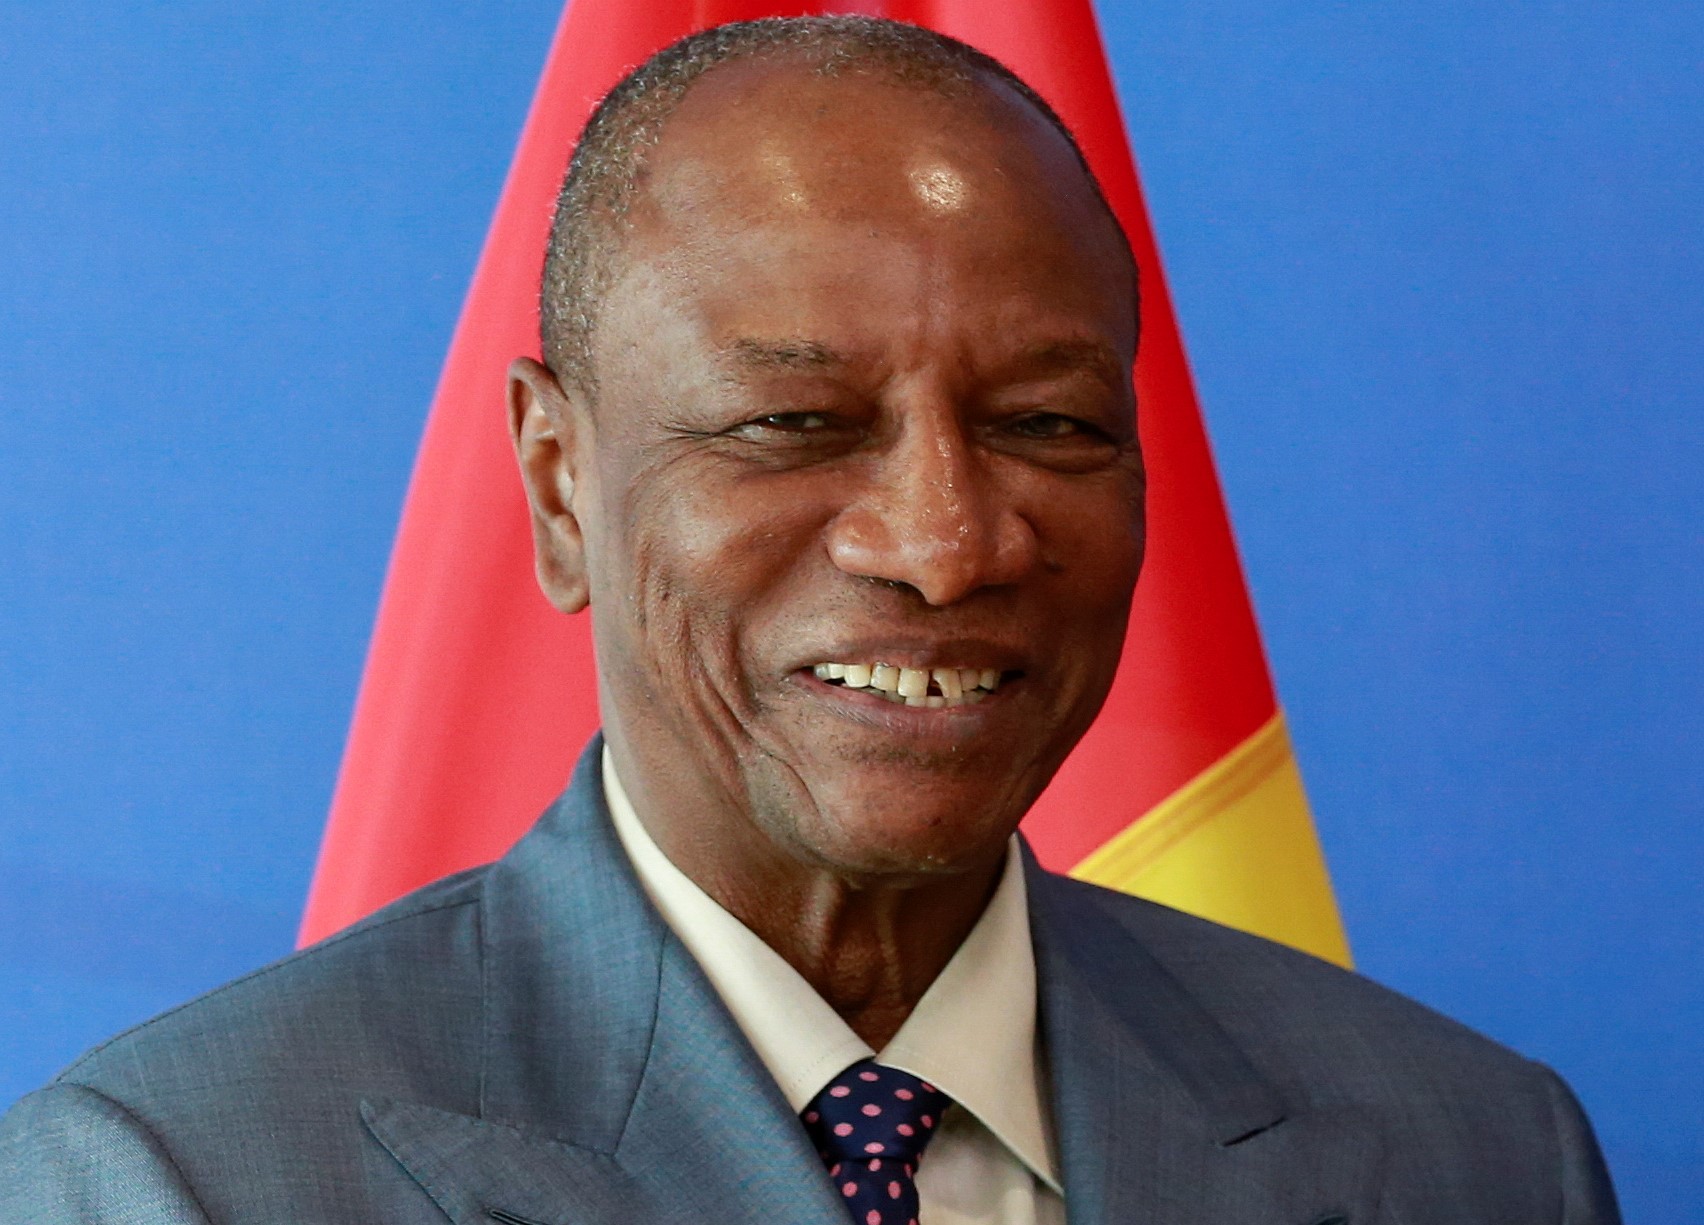 epa09449543 (FILE) - Alpha Conde the President of Guinea prior to a meeting in Brussels, Belgium, 06 June 2017 (reissued 05 September 2021). Several local and international media reports indicate Guinea's President Alpha Conde has been detained by army special forces in Conakry as gunfire was heard on the streets of the centre of Guinea's capital, Conakry, 05 September 2021. A Guinean state television broadcast shows Colonel Mamady Doumbouya saying President Alpha Conde was in custody and warned people to stay indoors.  EPA/OLIVIER HOSLET